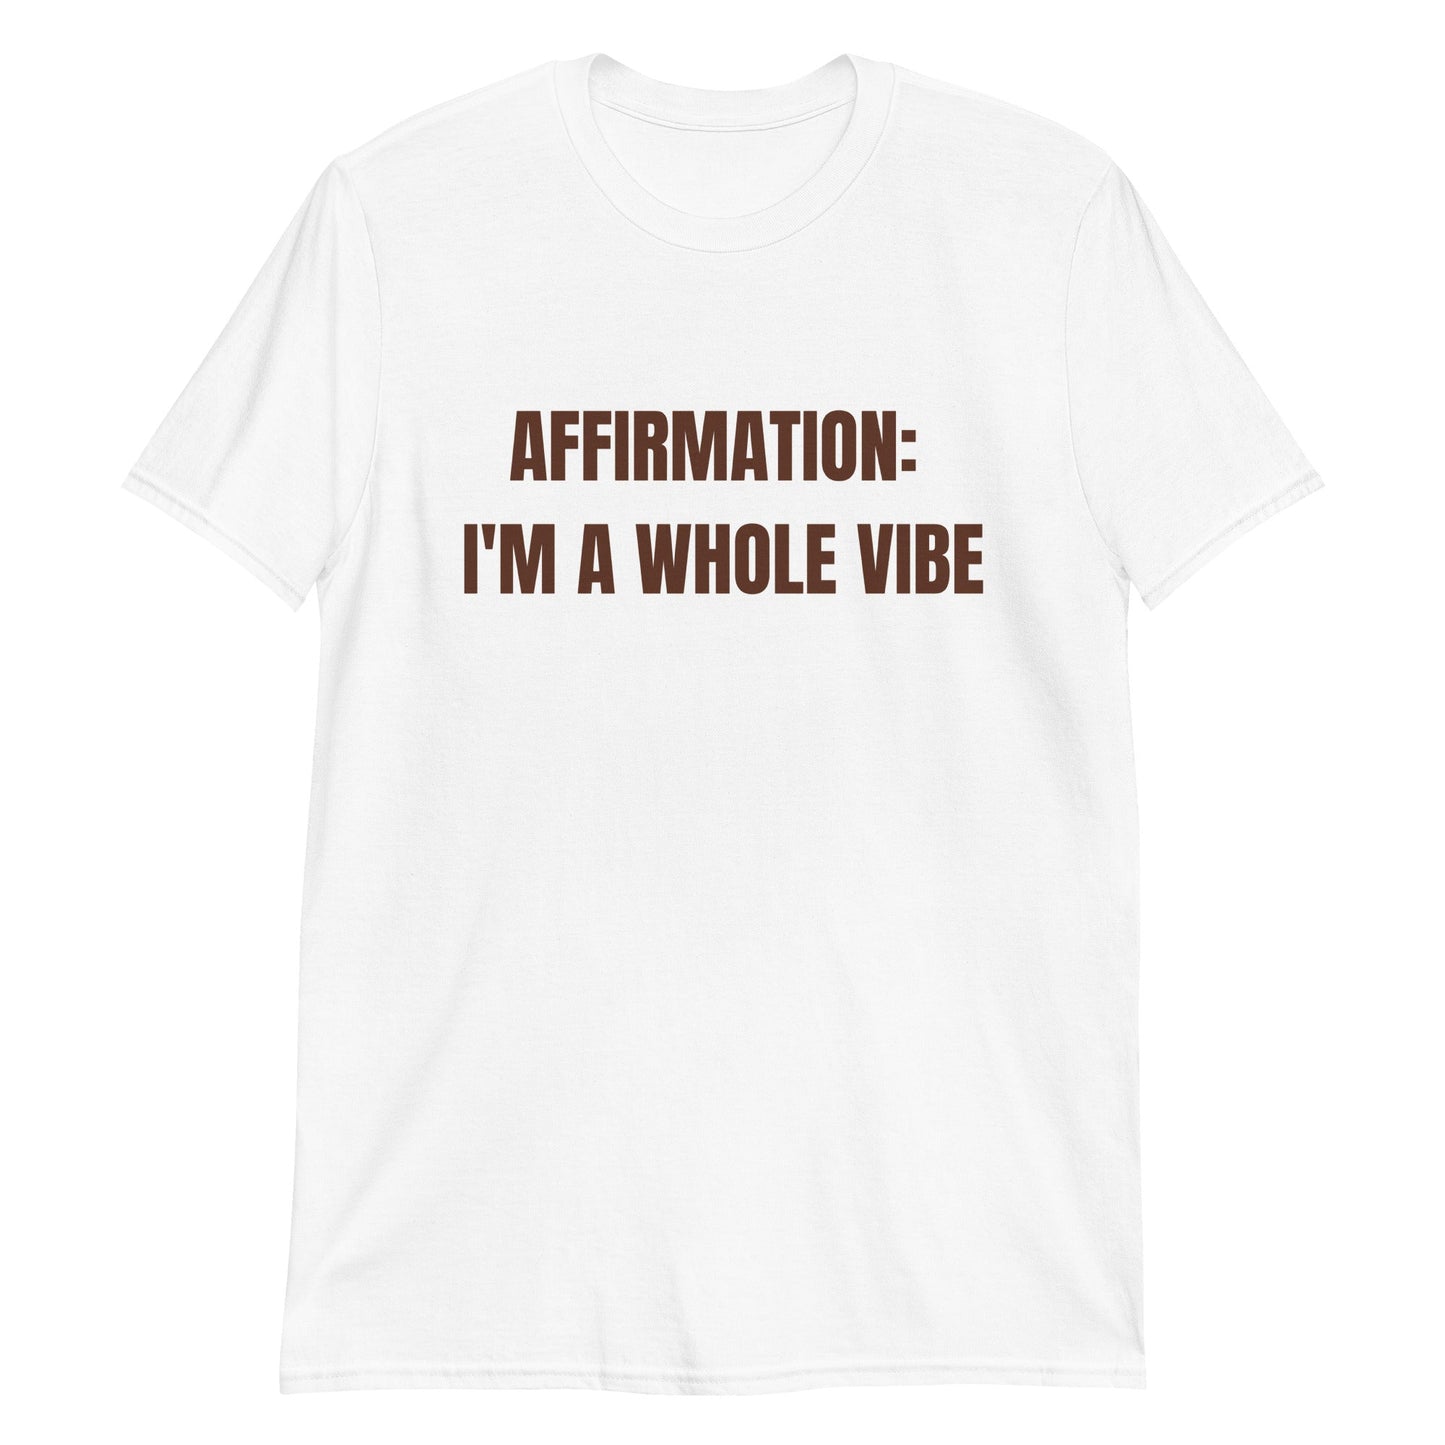 Affirmation: I'm a Whole Vibe Short-Sleeve Unisex T-Shirt (Refer to size chart - for a slim fir order a size down) - Catch This Tea Shirts